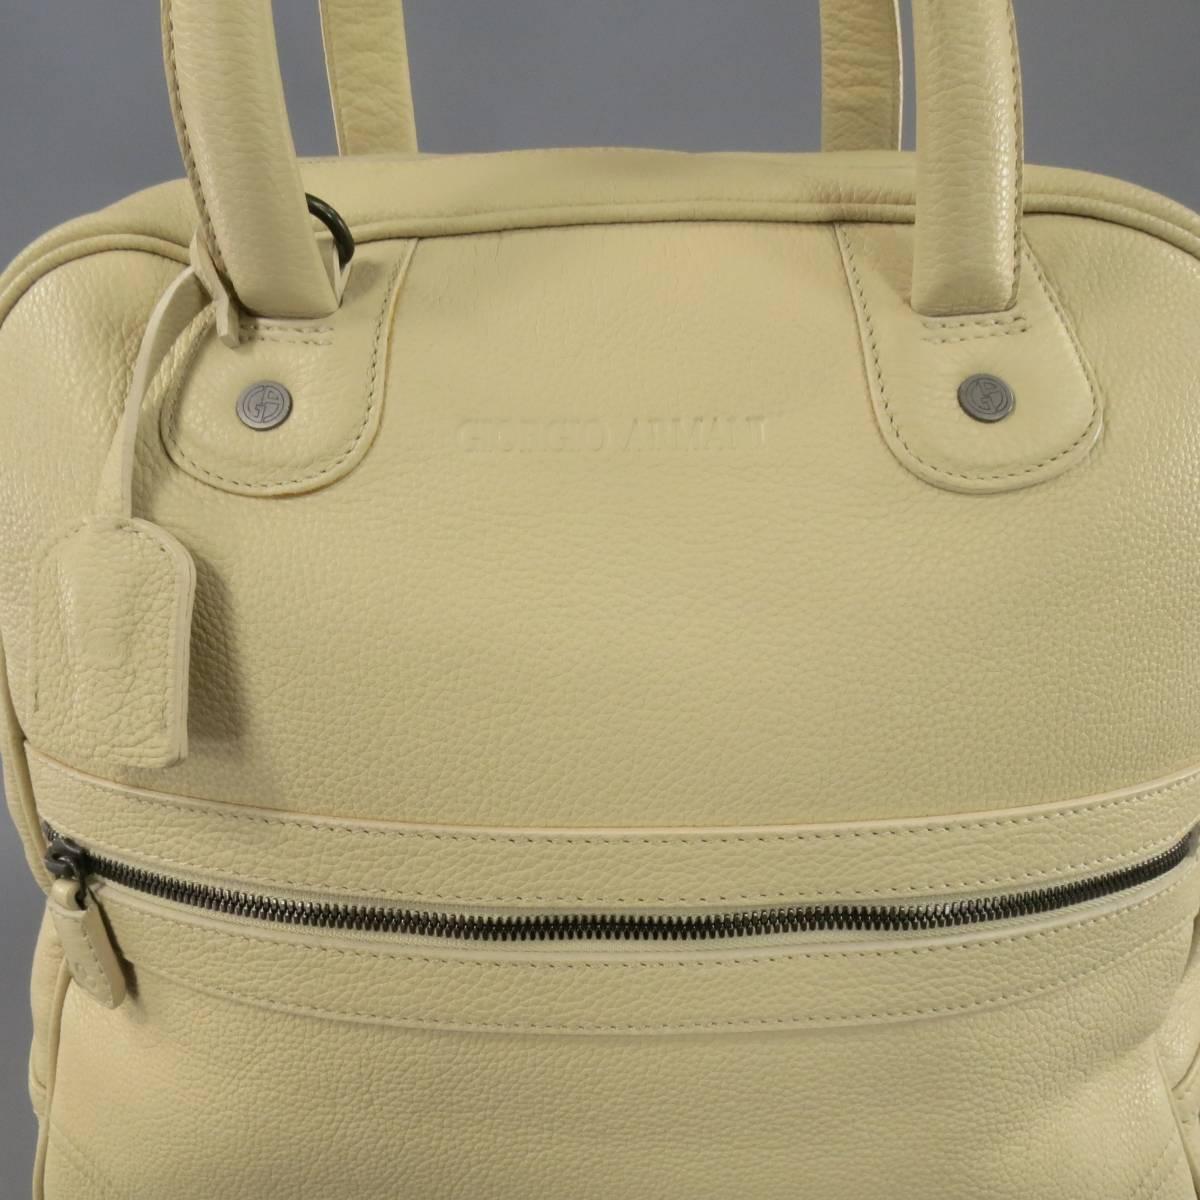 This large tote bag by GIORGIO ARMANI comes in pebbled cream beige leather and features a logo embossed front, zip pocket, double leather top handles with key clochette, and top zip closure with snap and lock option. Faint marks shown in detail